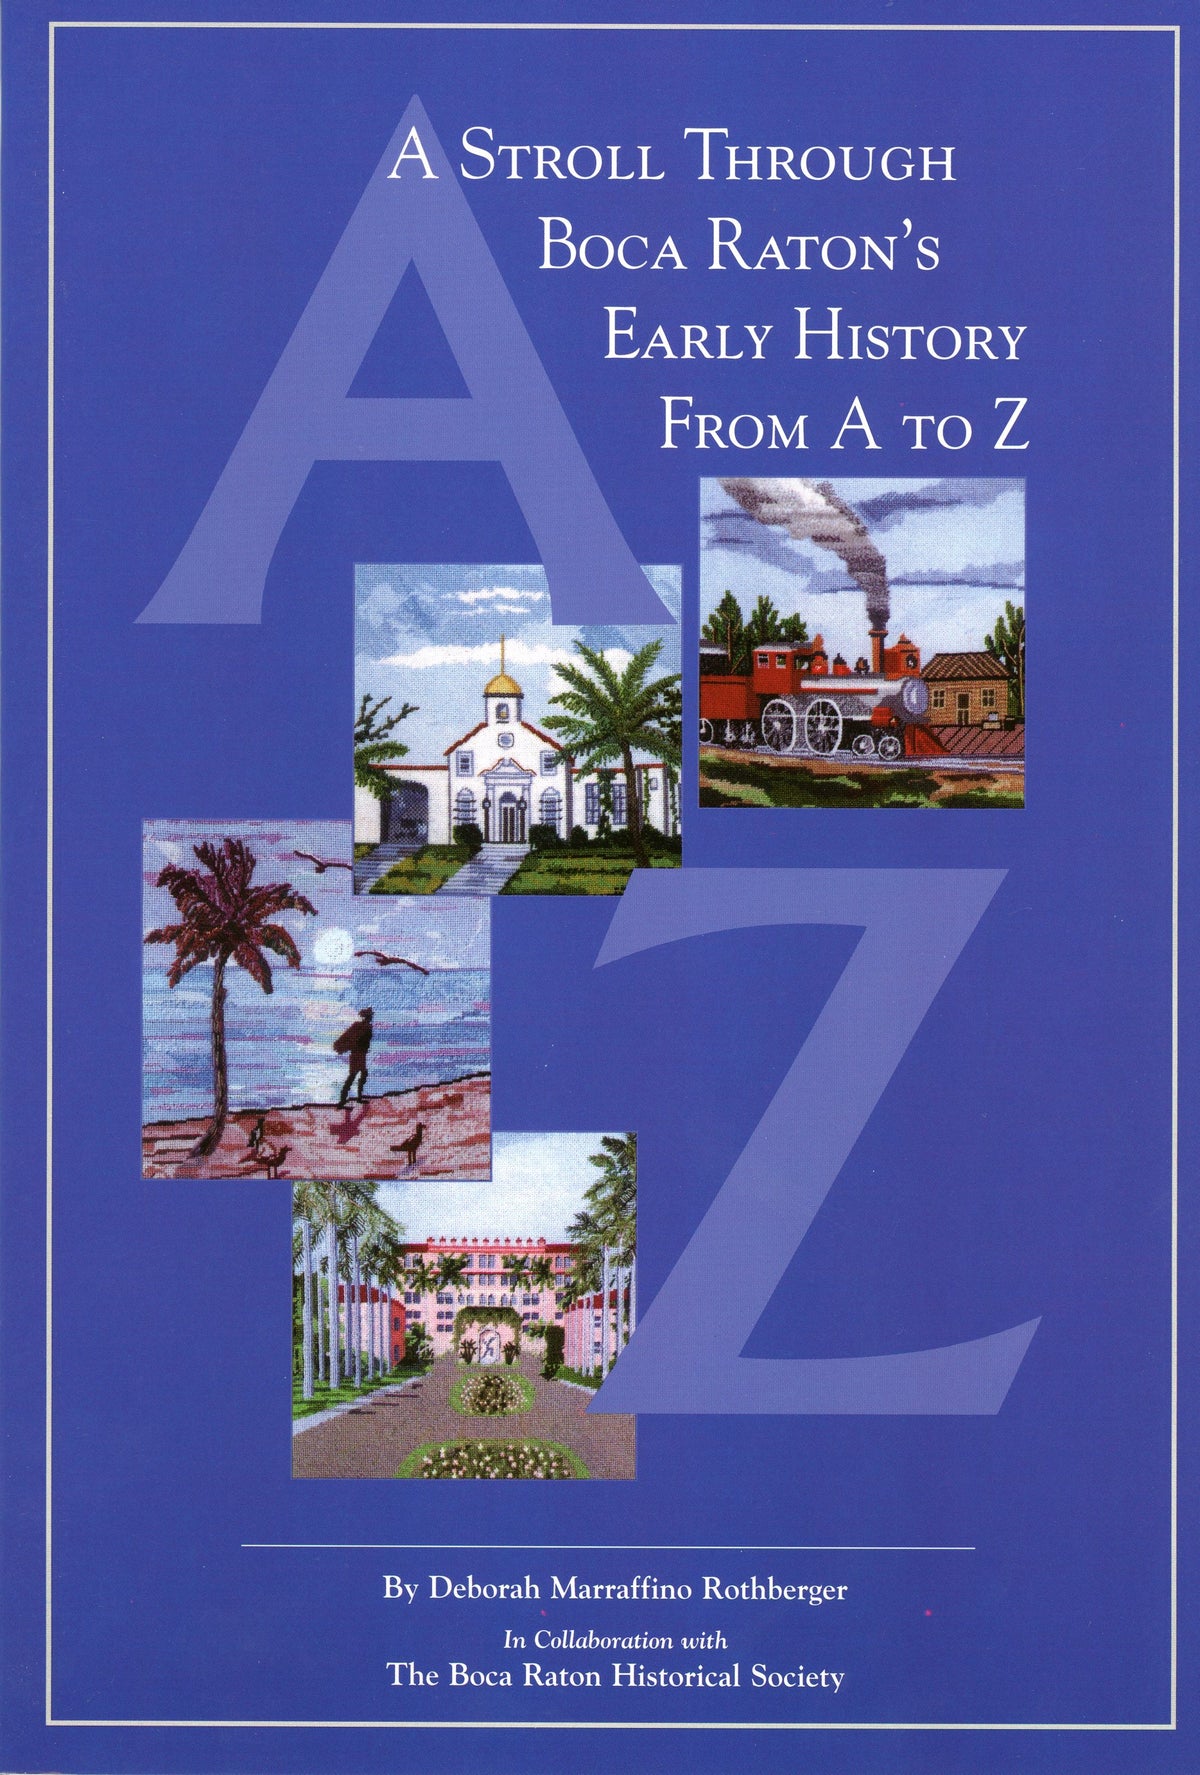 A Stroll Through Boca Raton's Early History From A To Z